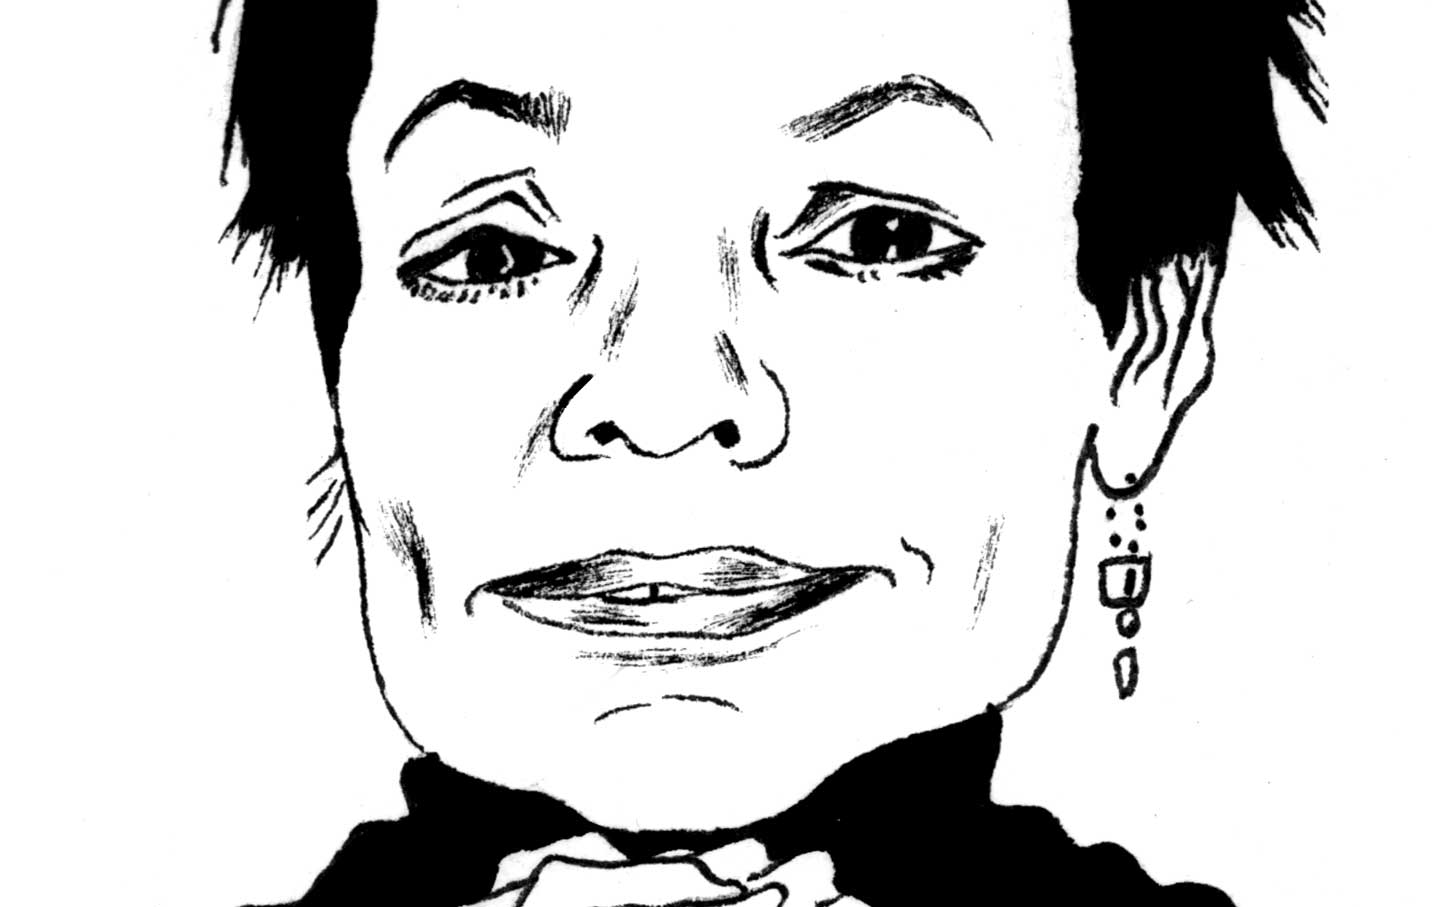 Using Art to Expose What Government Hides: An Interview With Laurie Anderson